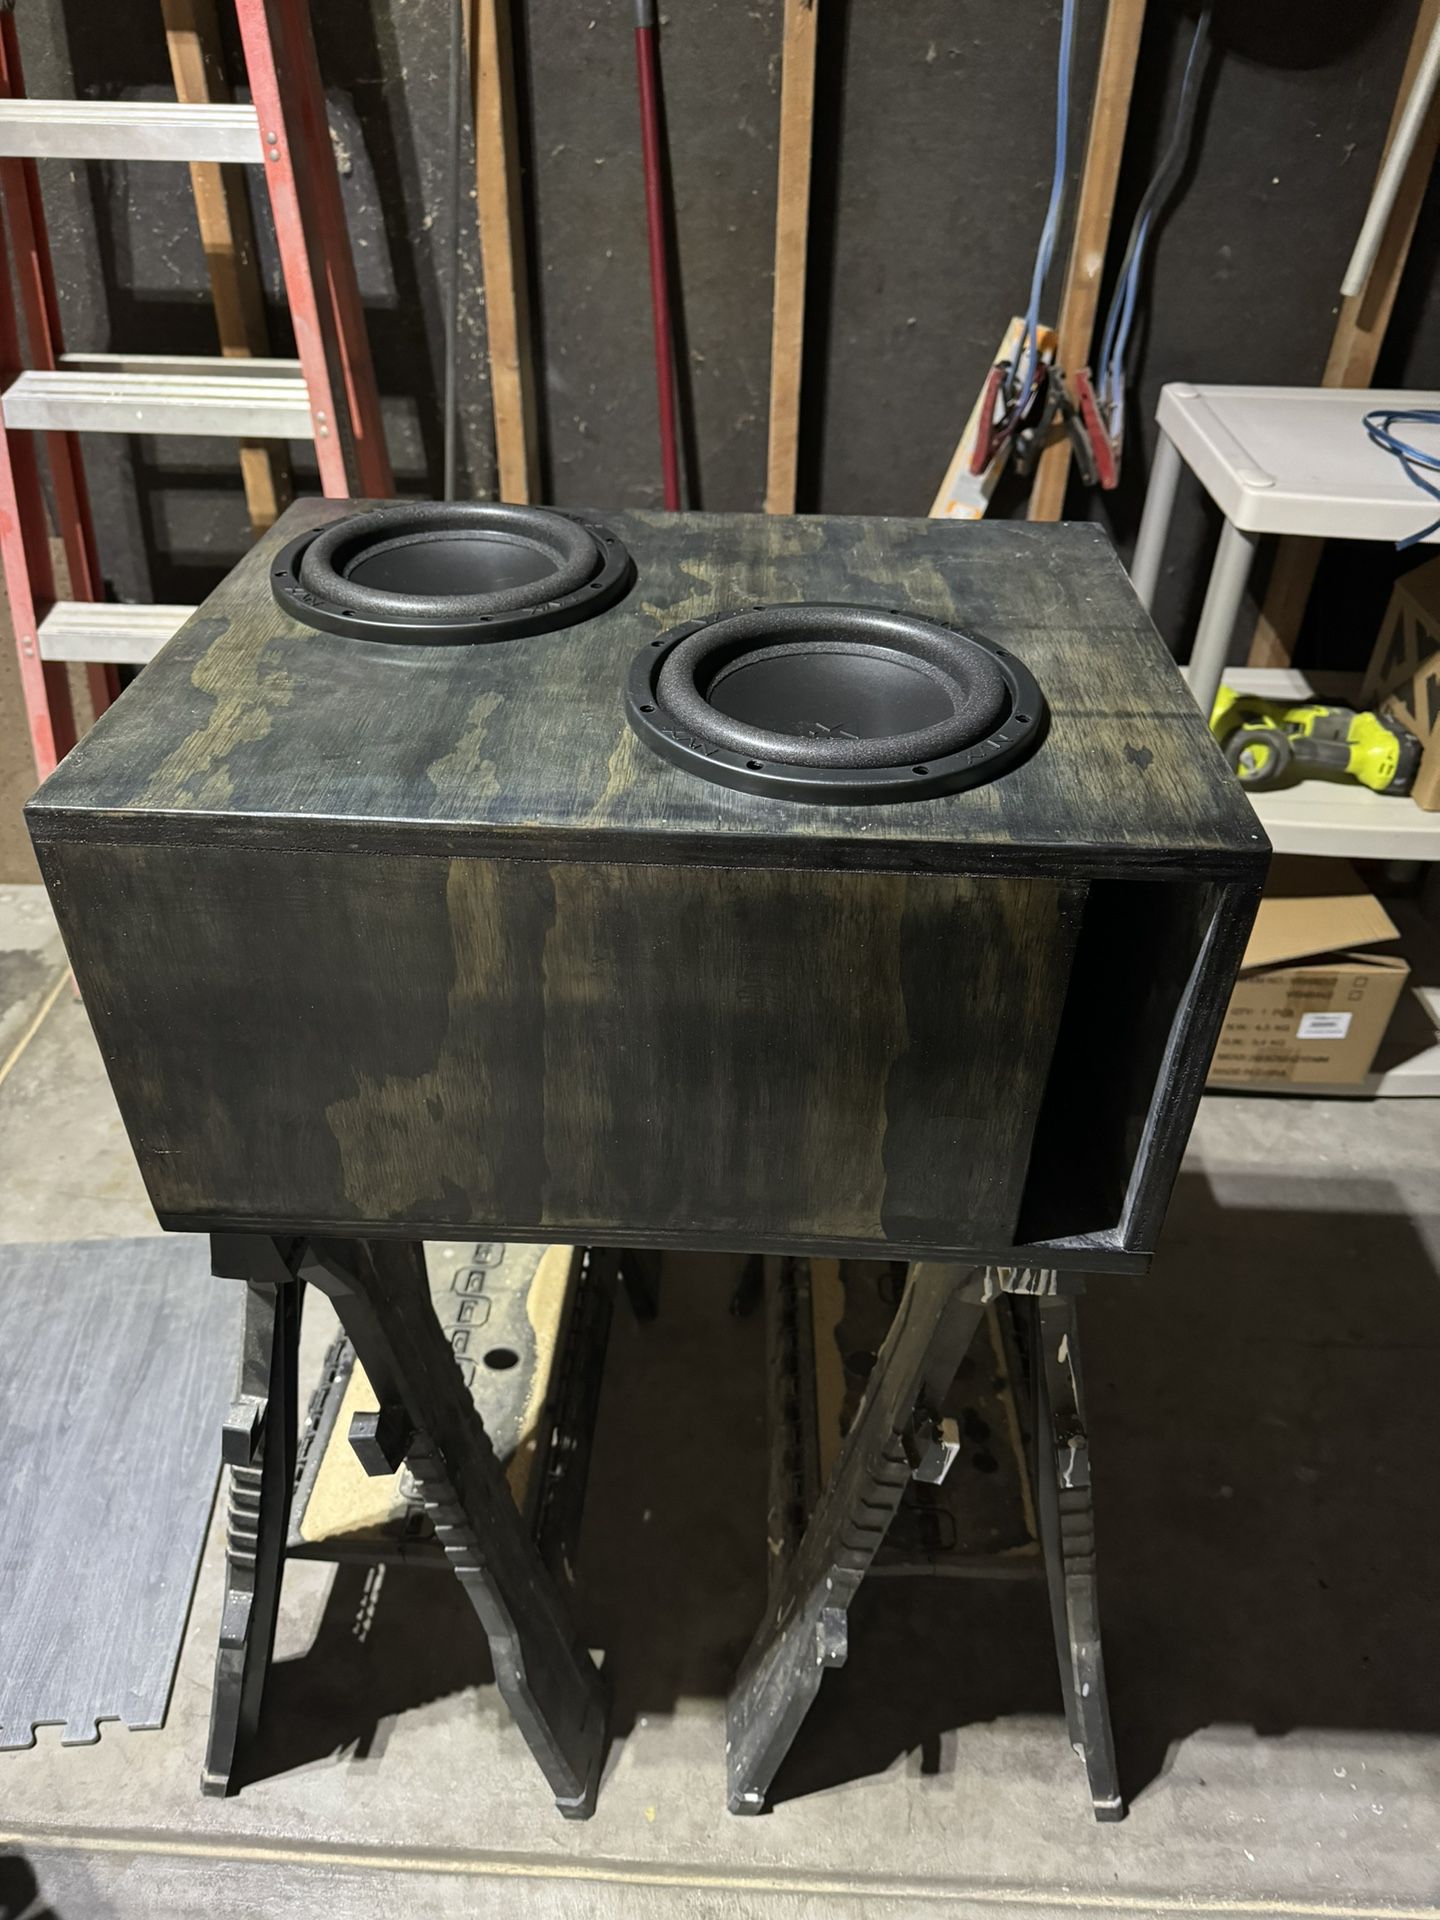 8 Inch NVX Subwoofers. 